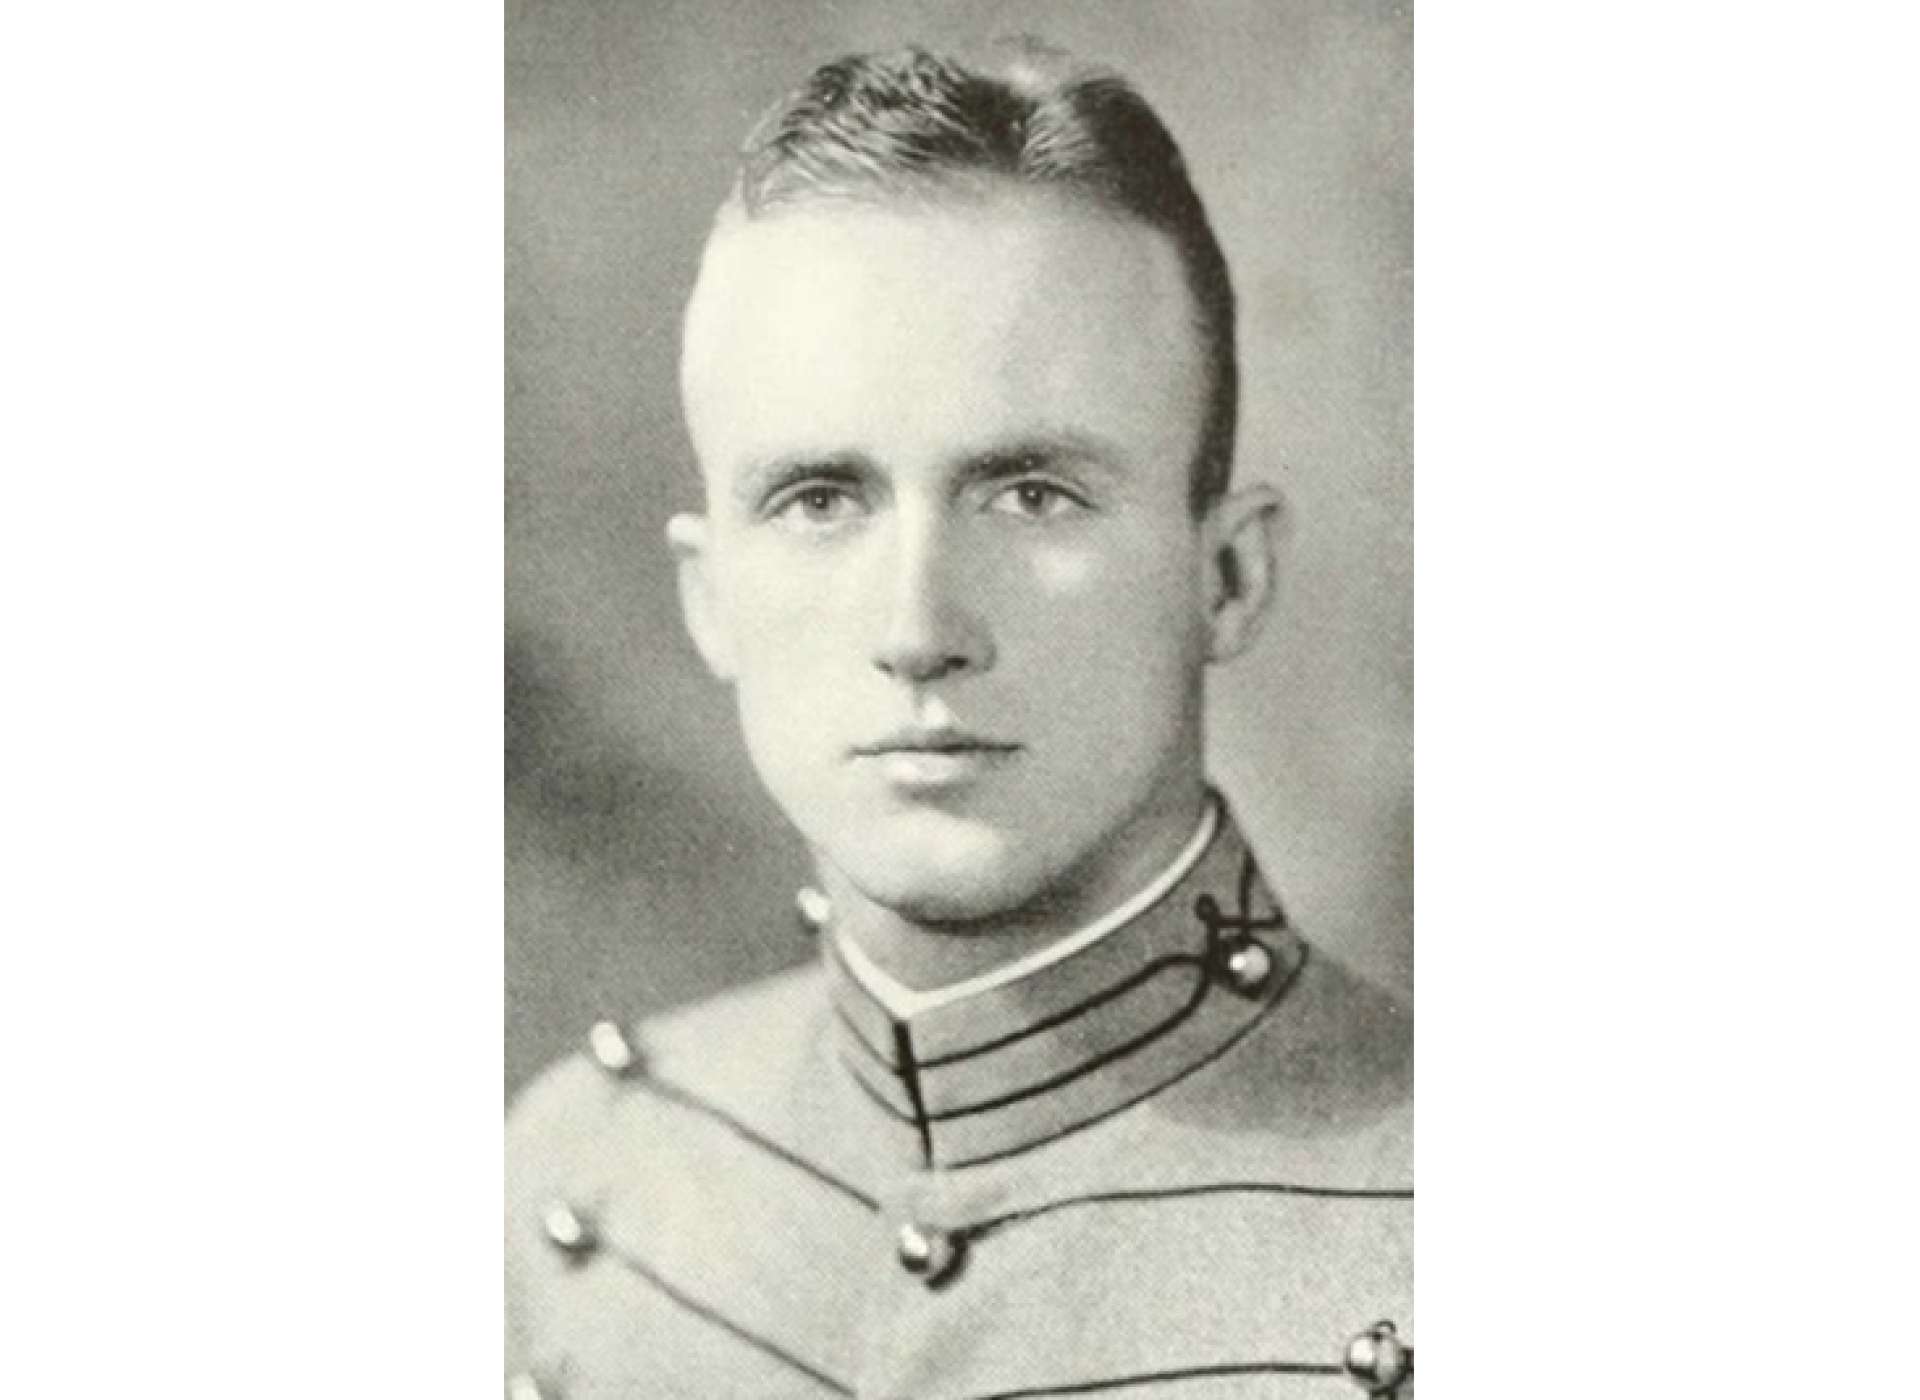 Cadet George Marshall at West Point. Graduating in 1935, Lieutenant Colonel Marshall would lead the Army contingent during the commando assault on the Oran port in the early morning of November 8, 1942.